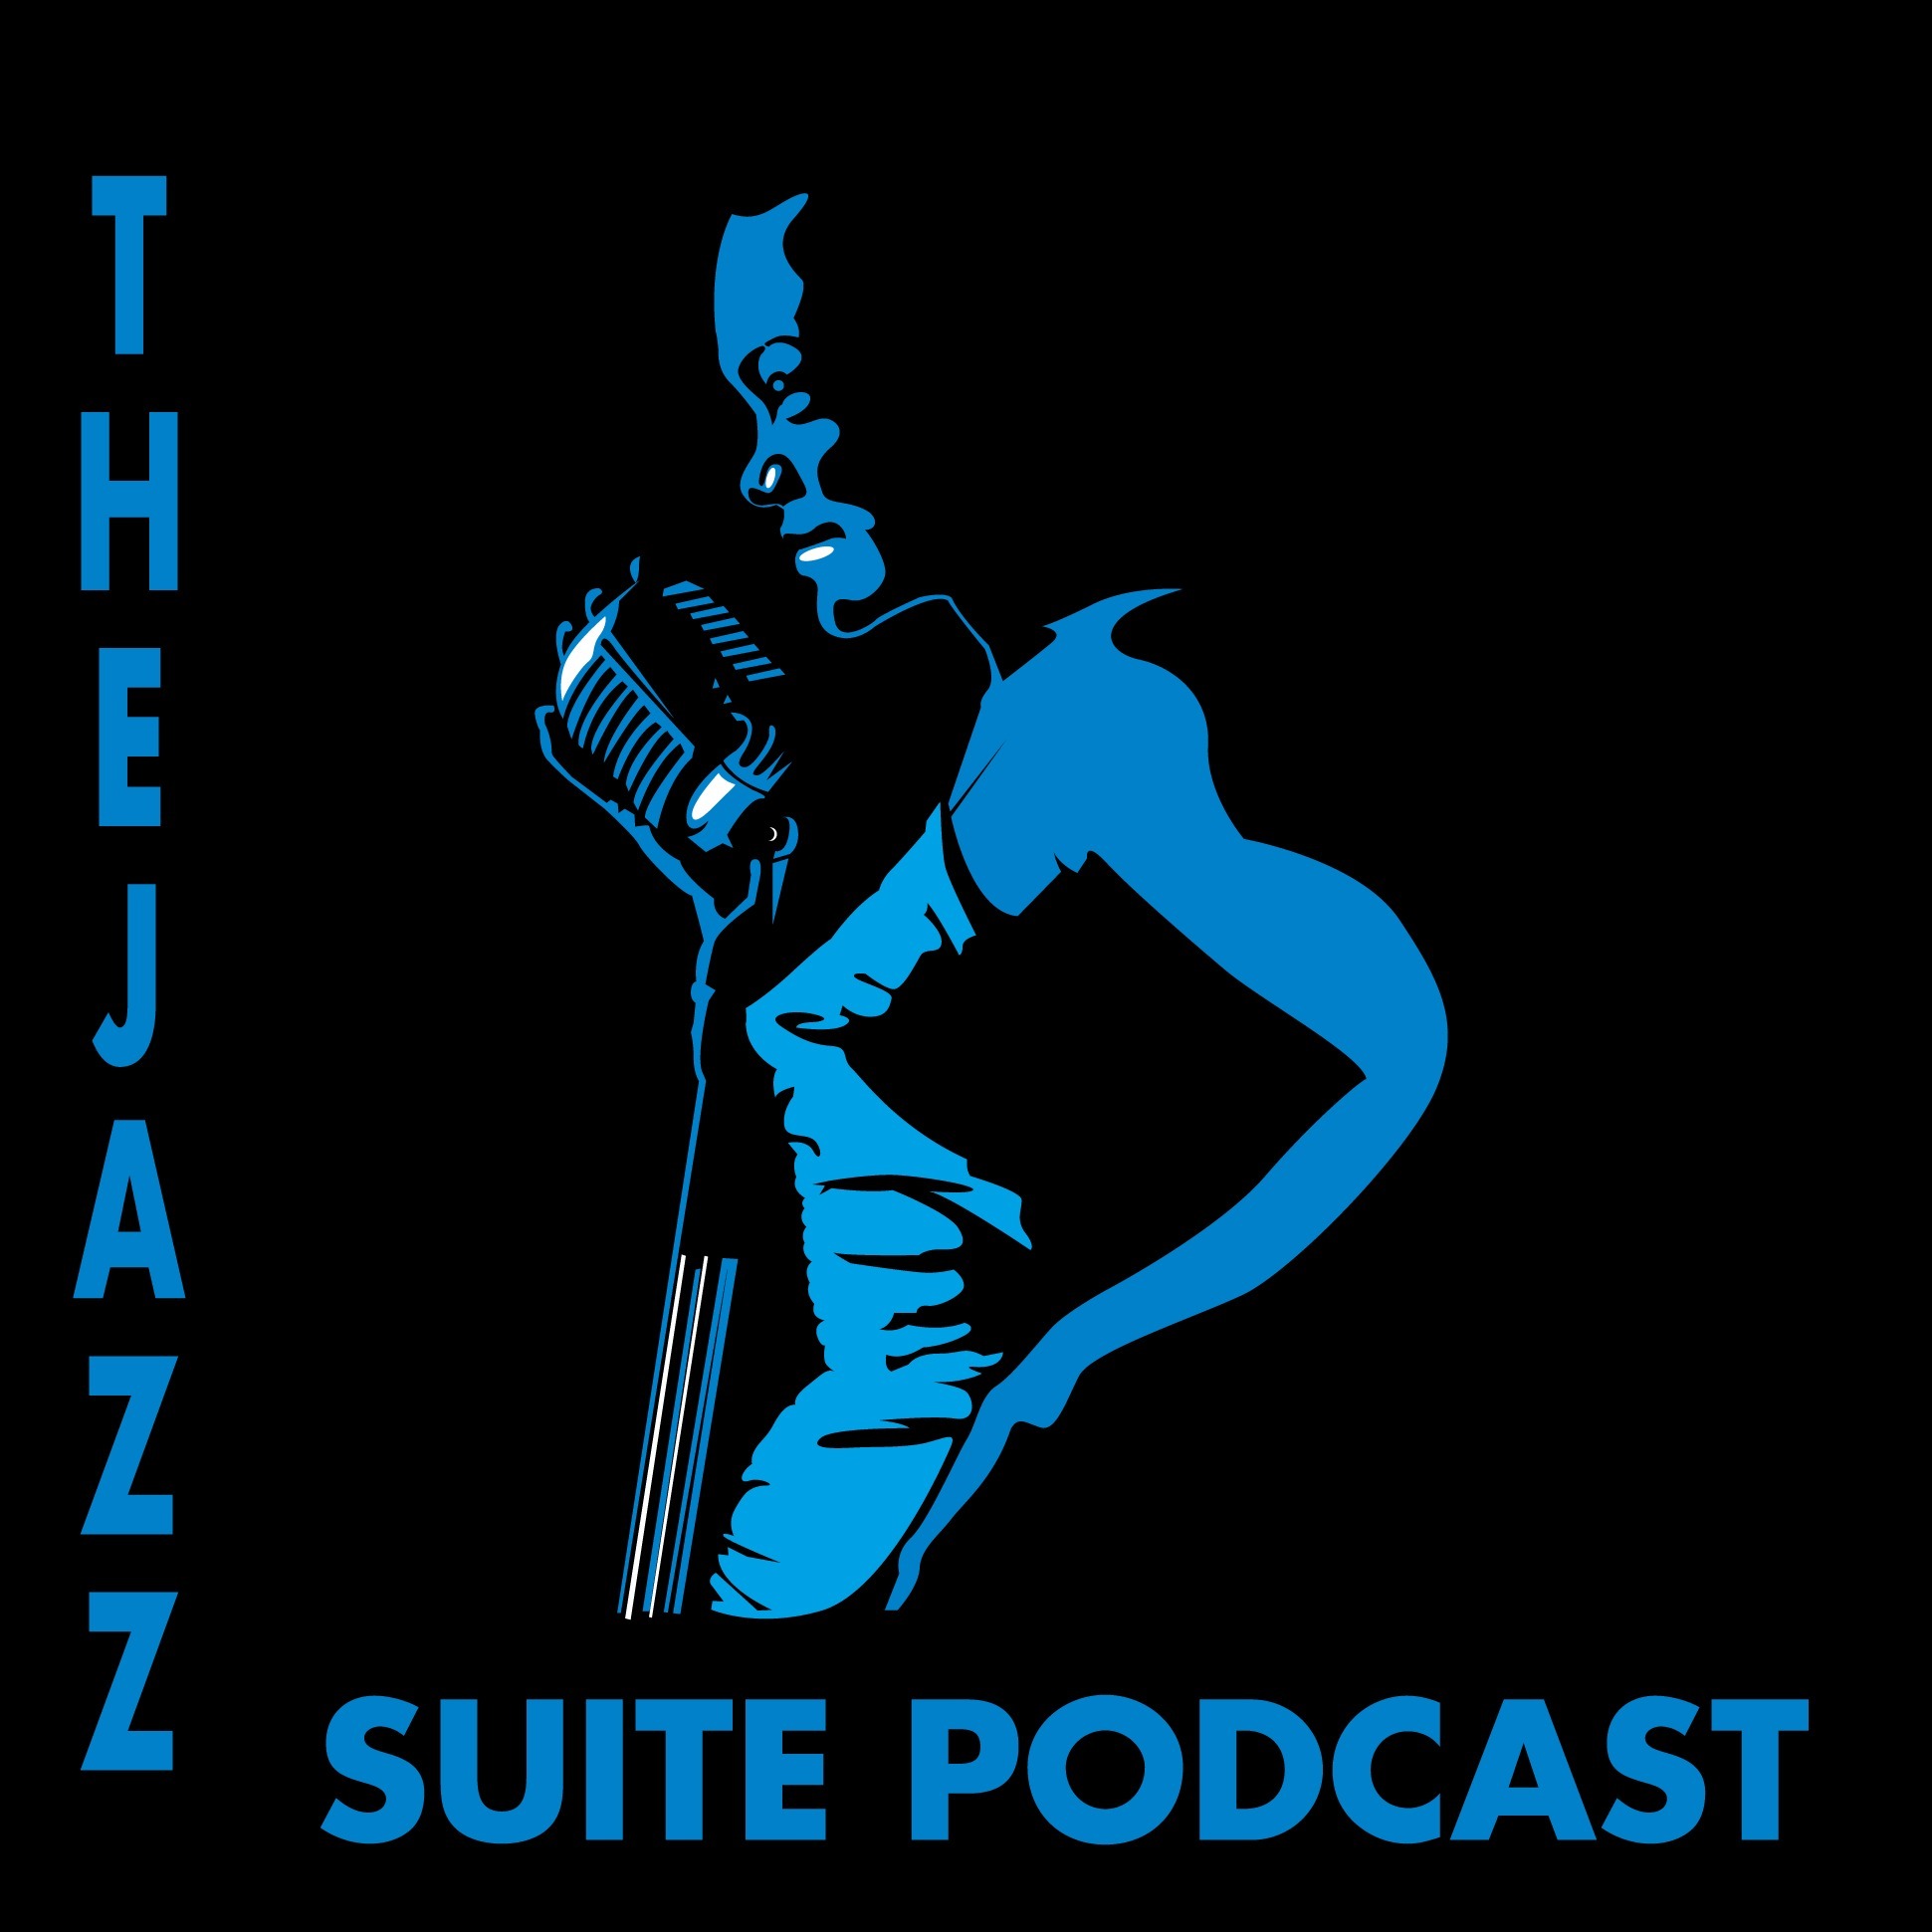 The Jazz Suite Podcast Show #458